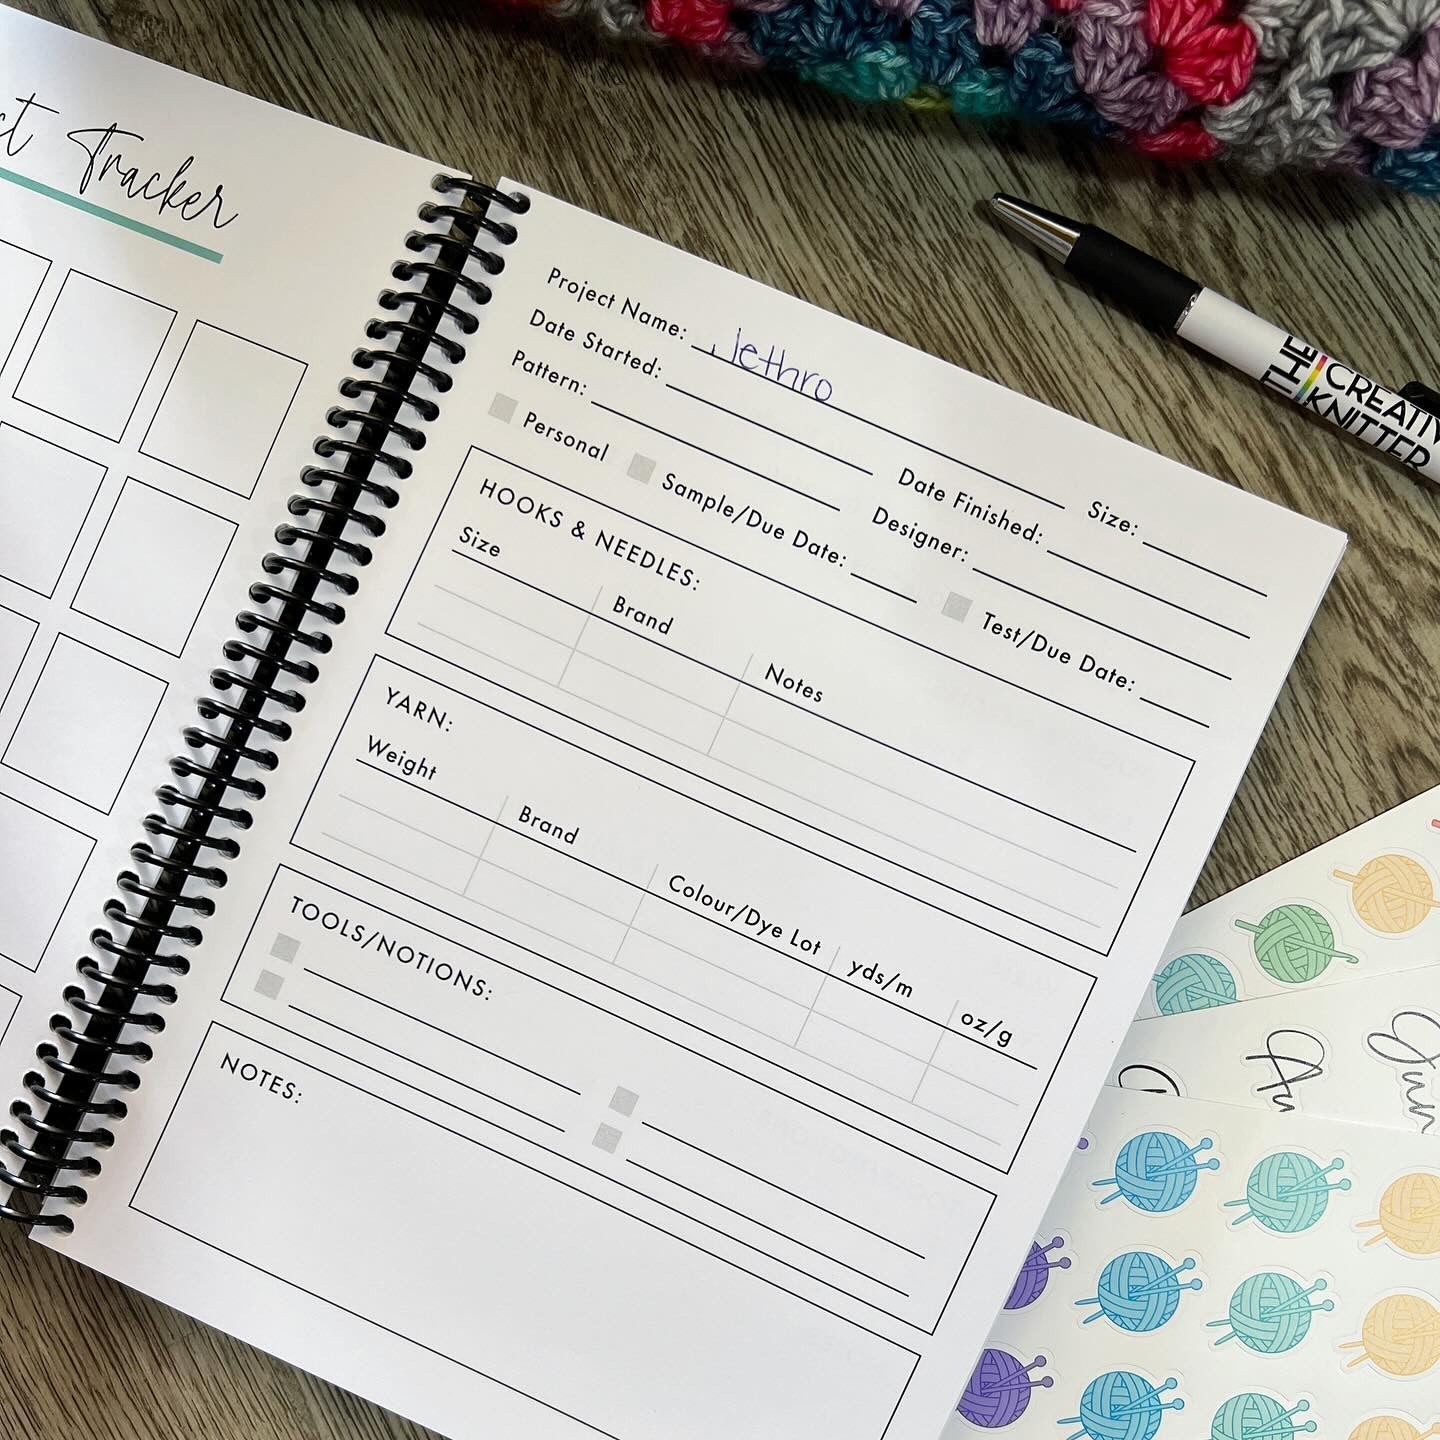 The Daily Stitch Planner